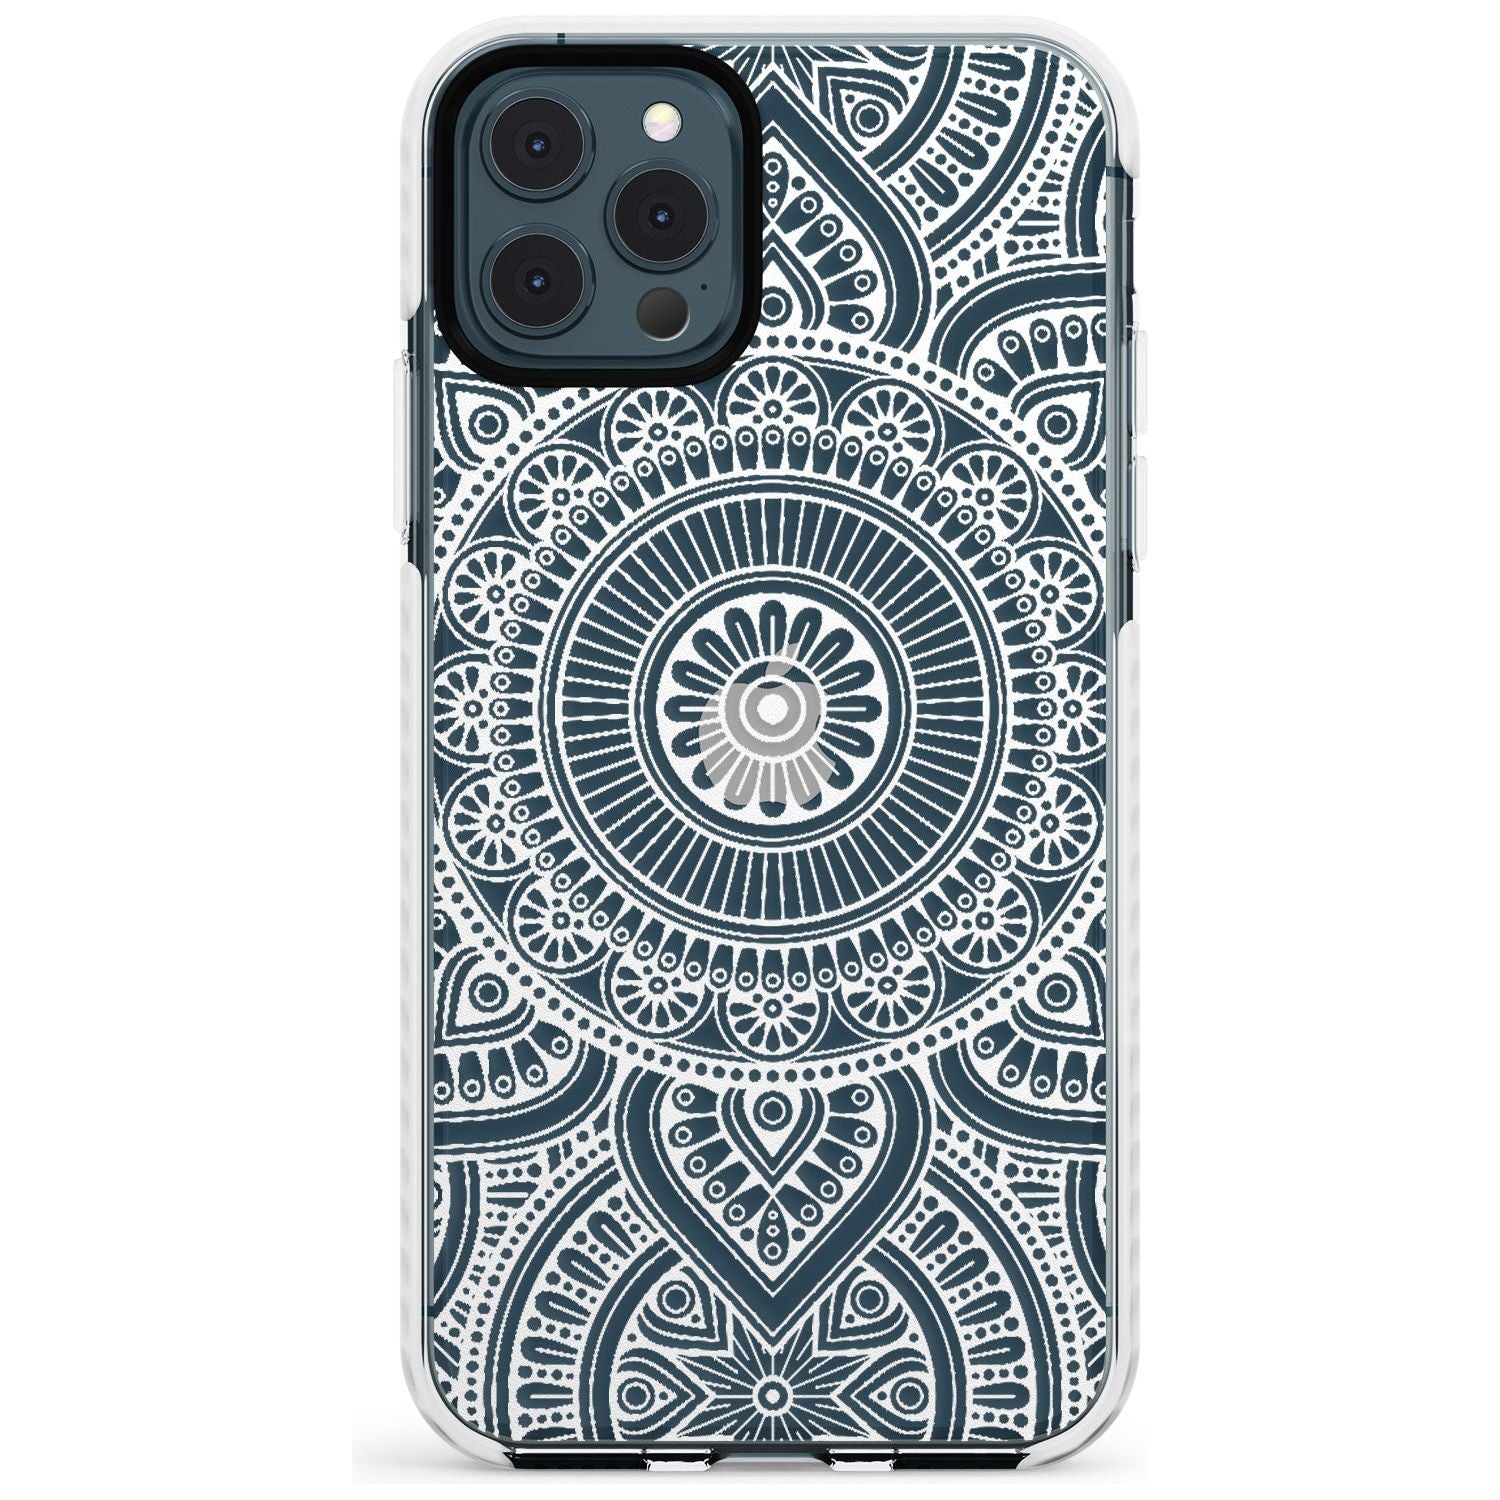 White Henna Flower Wheel Impact Phone Case for iPhone 11 Pro Max